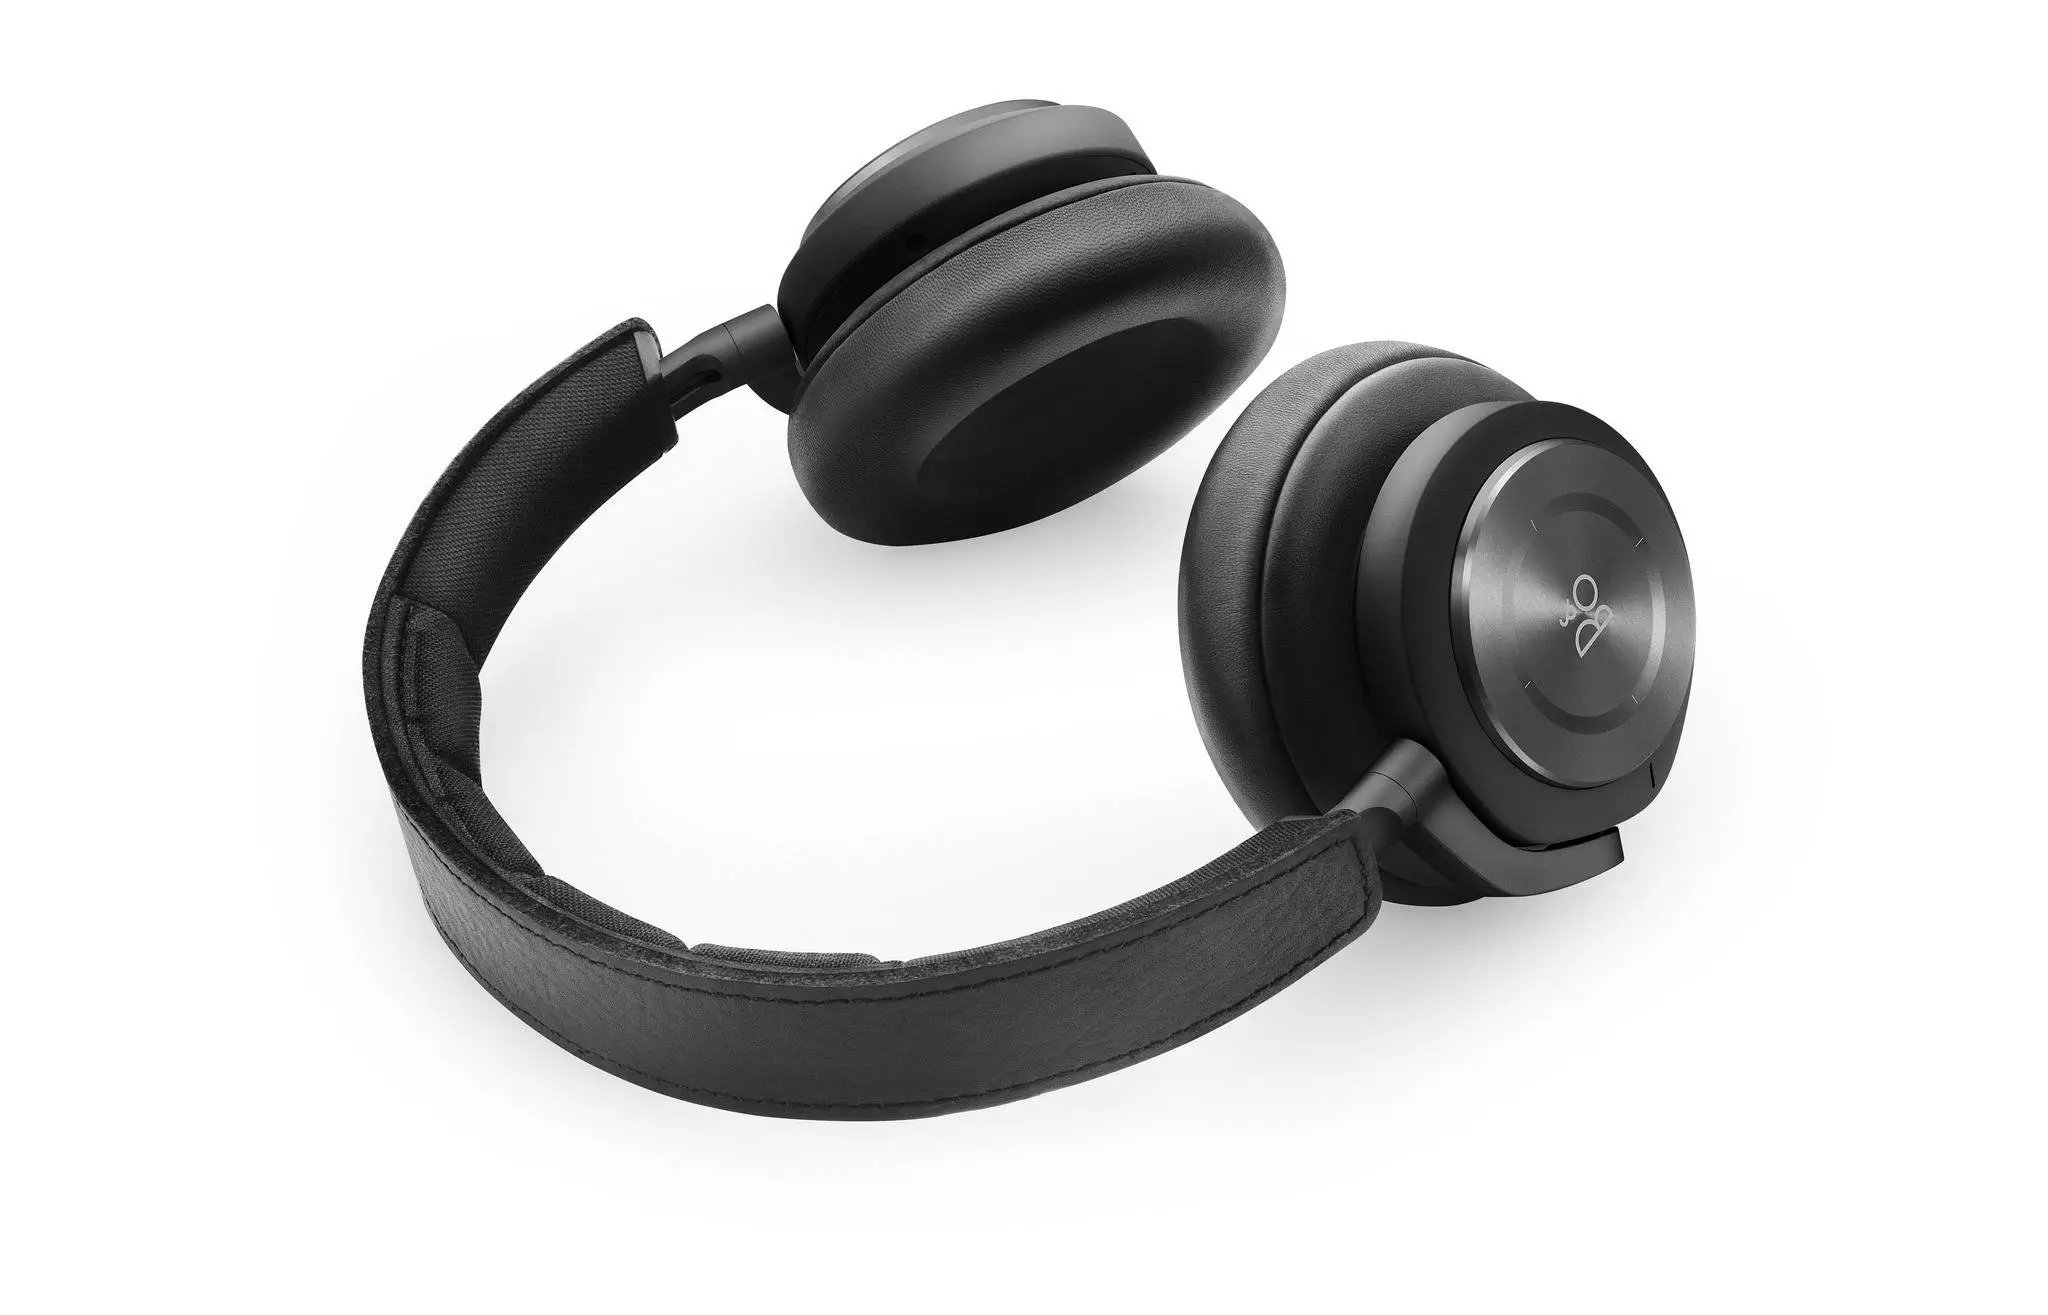 BEOPLAY H9i